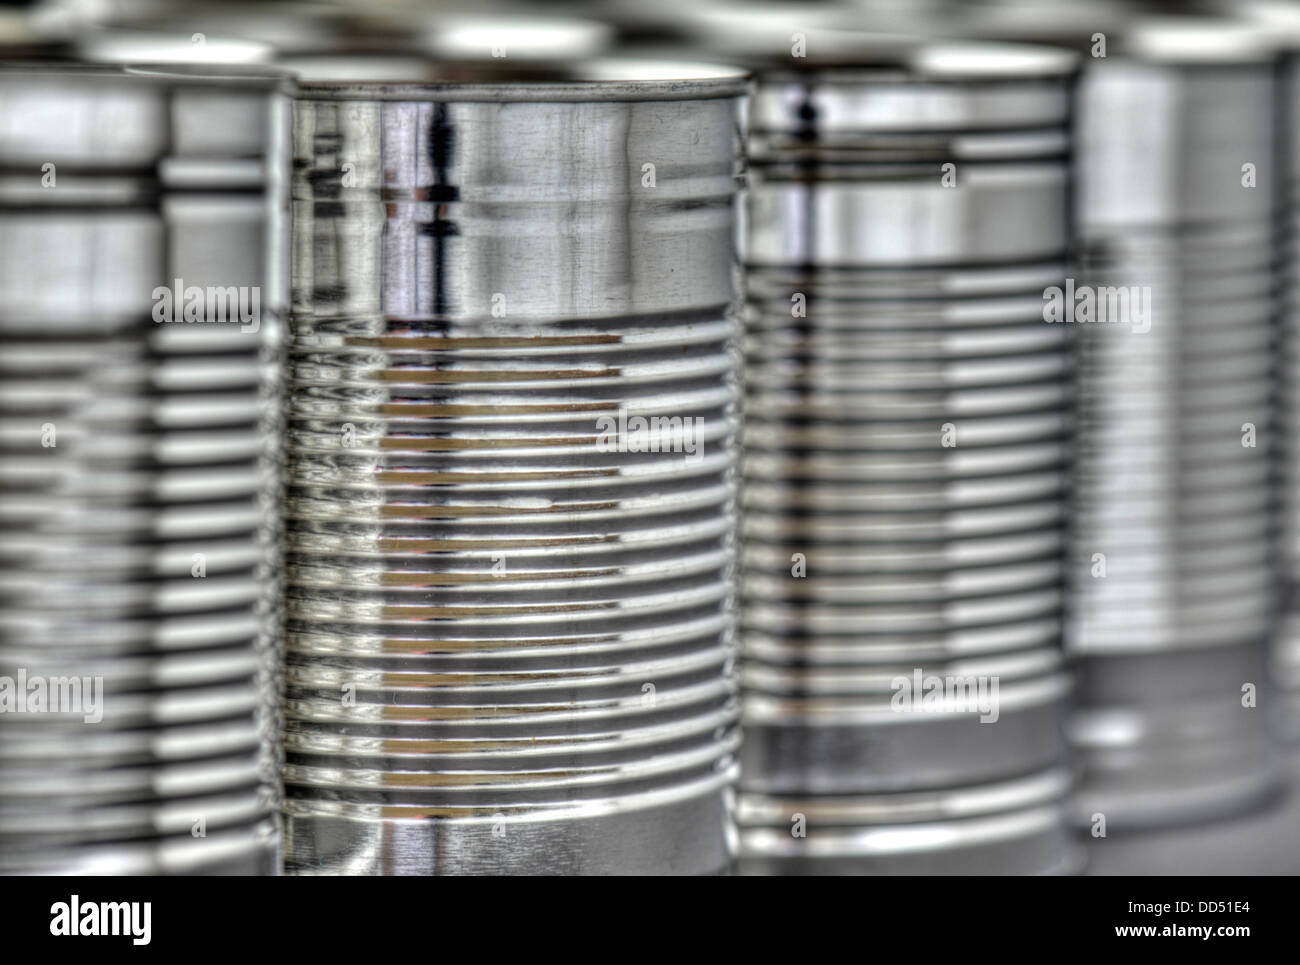 Close-up of alloy food cans Stock Photo